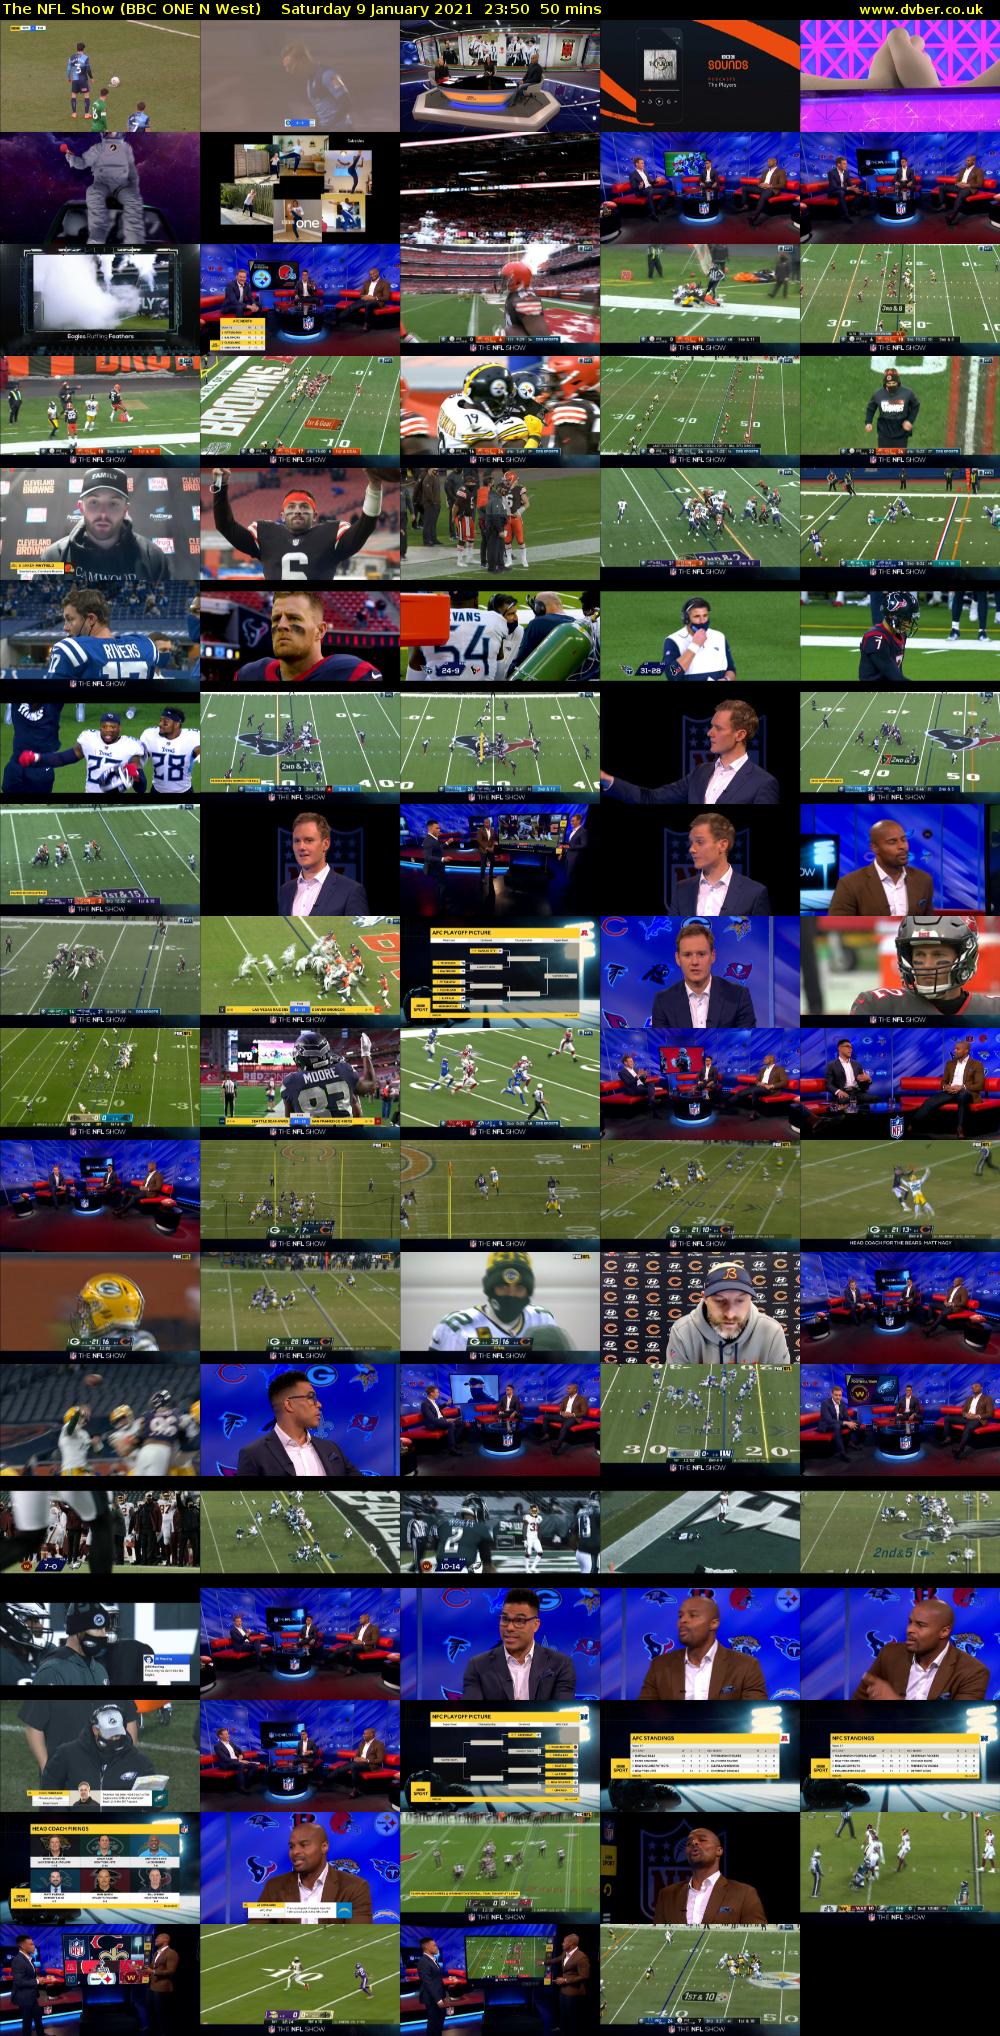 The NFL Show (BBC ONE N West) Saturday 9 January 2021 23:50 - 00:40